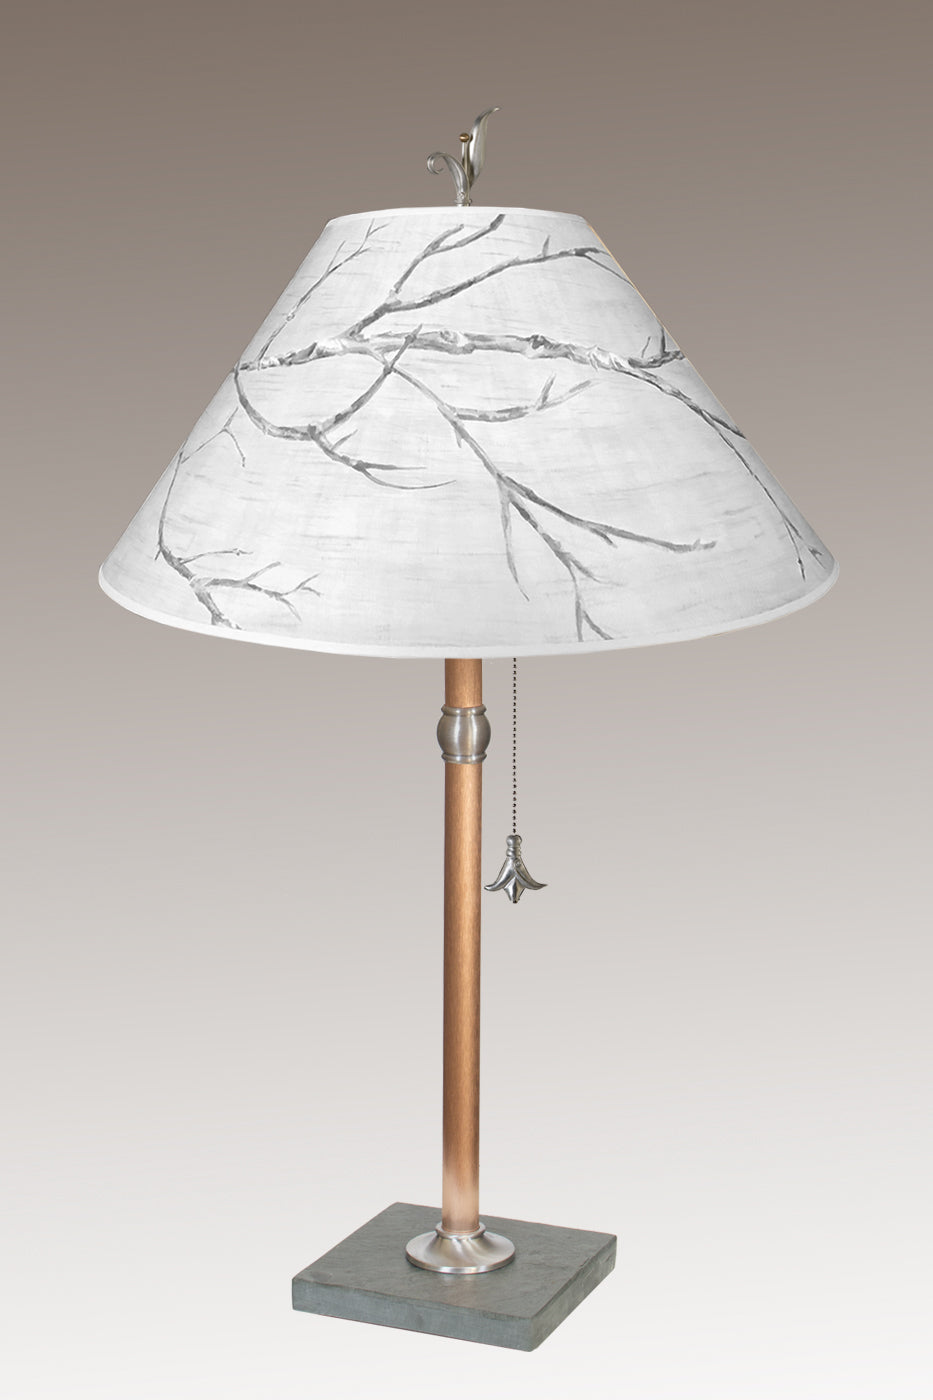 Copper Table Lamp with Large Conical Shade in Sweeping Branch